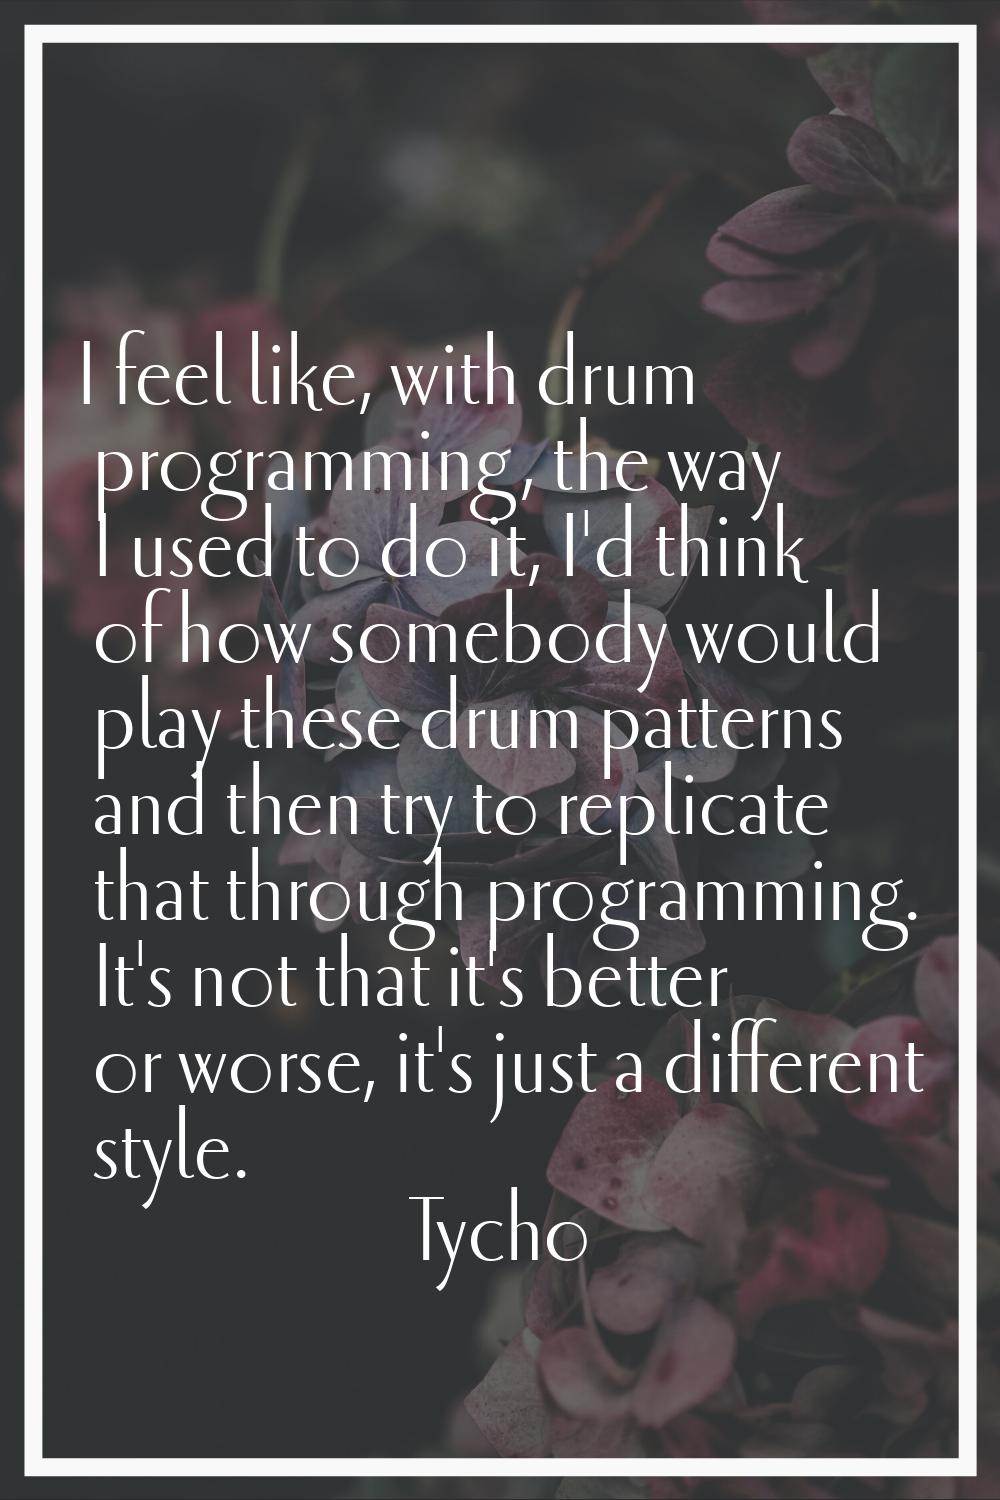 I feel like, with drum programming, the way I used to do it, I'd think of how somebody would play t